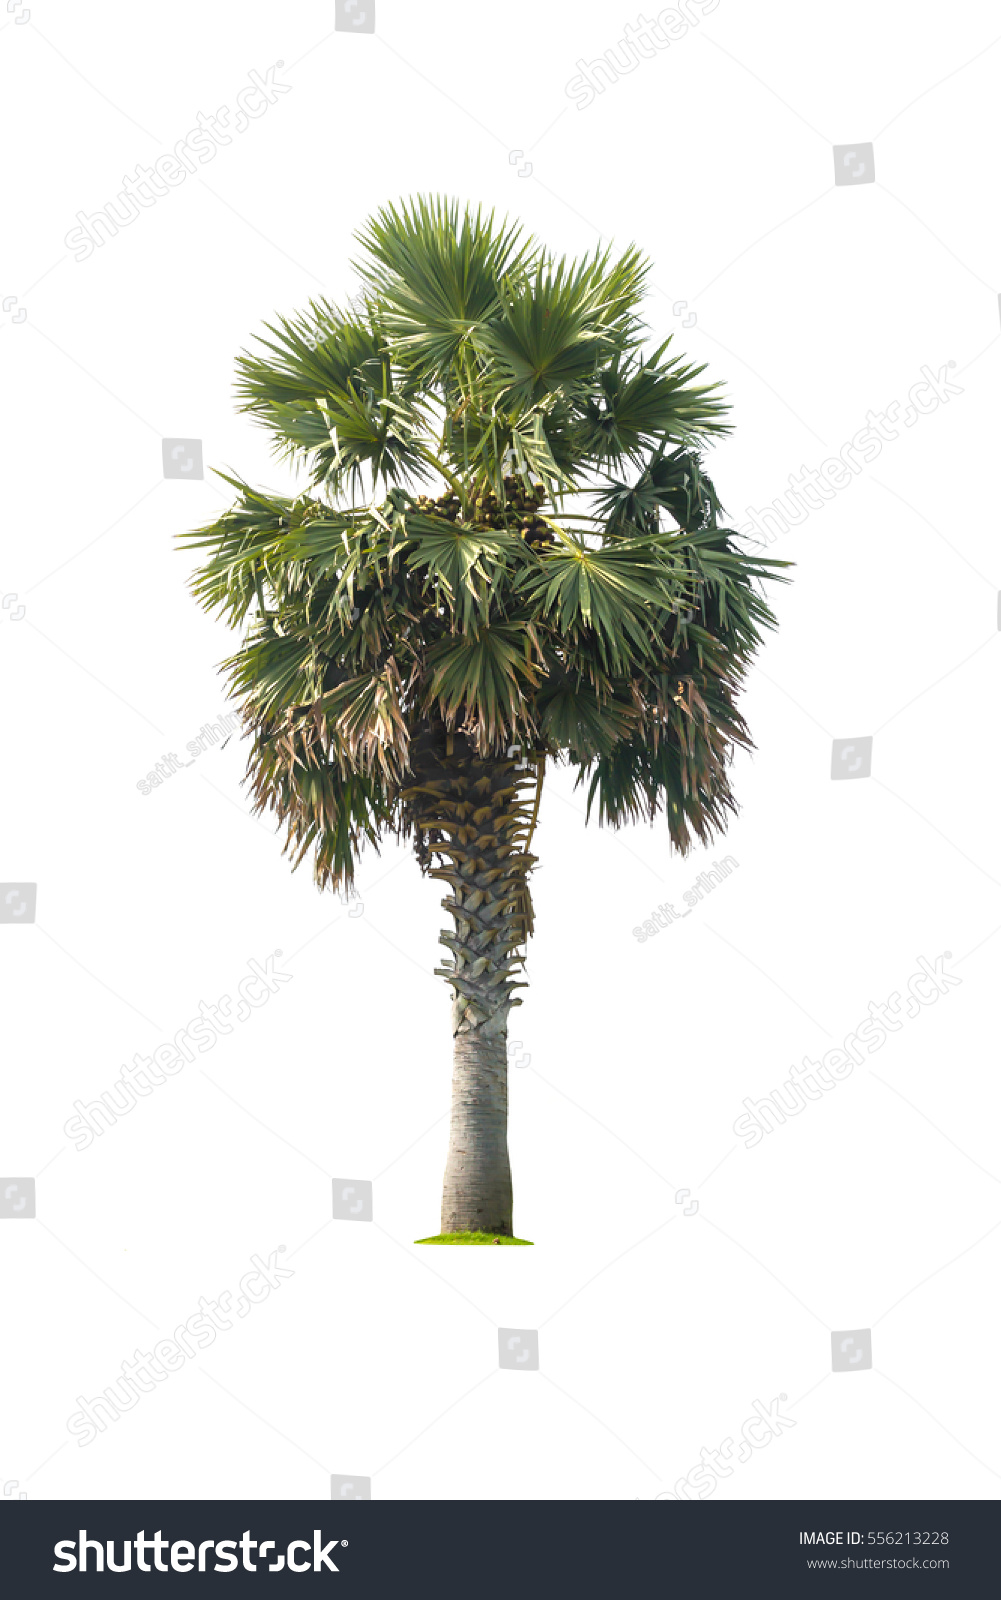 Palm Tree Isolated On White Background Stock Photo (Edit Now) 556213228